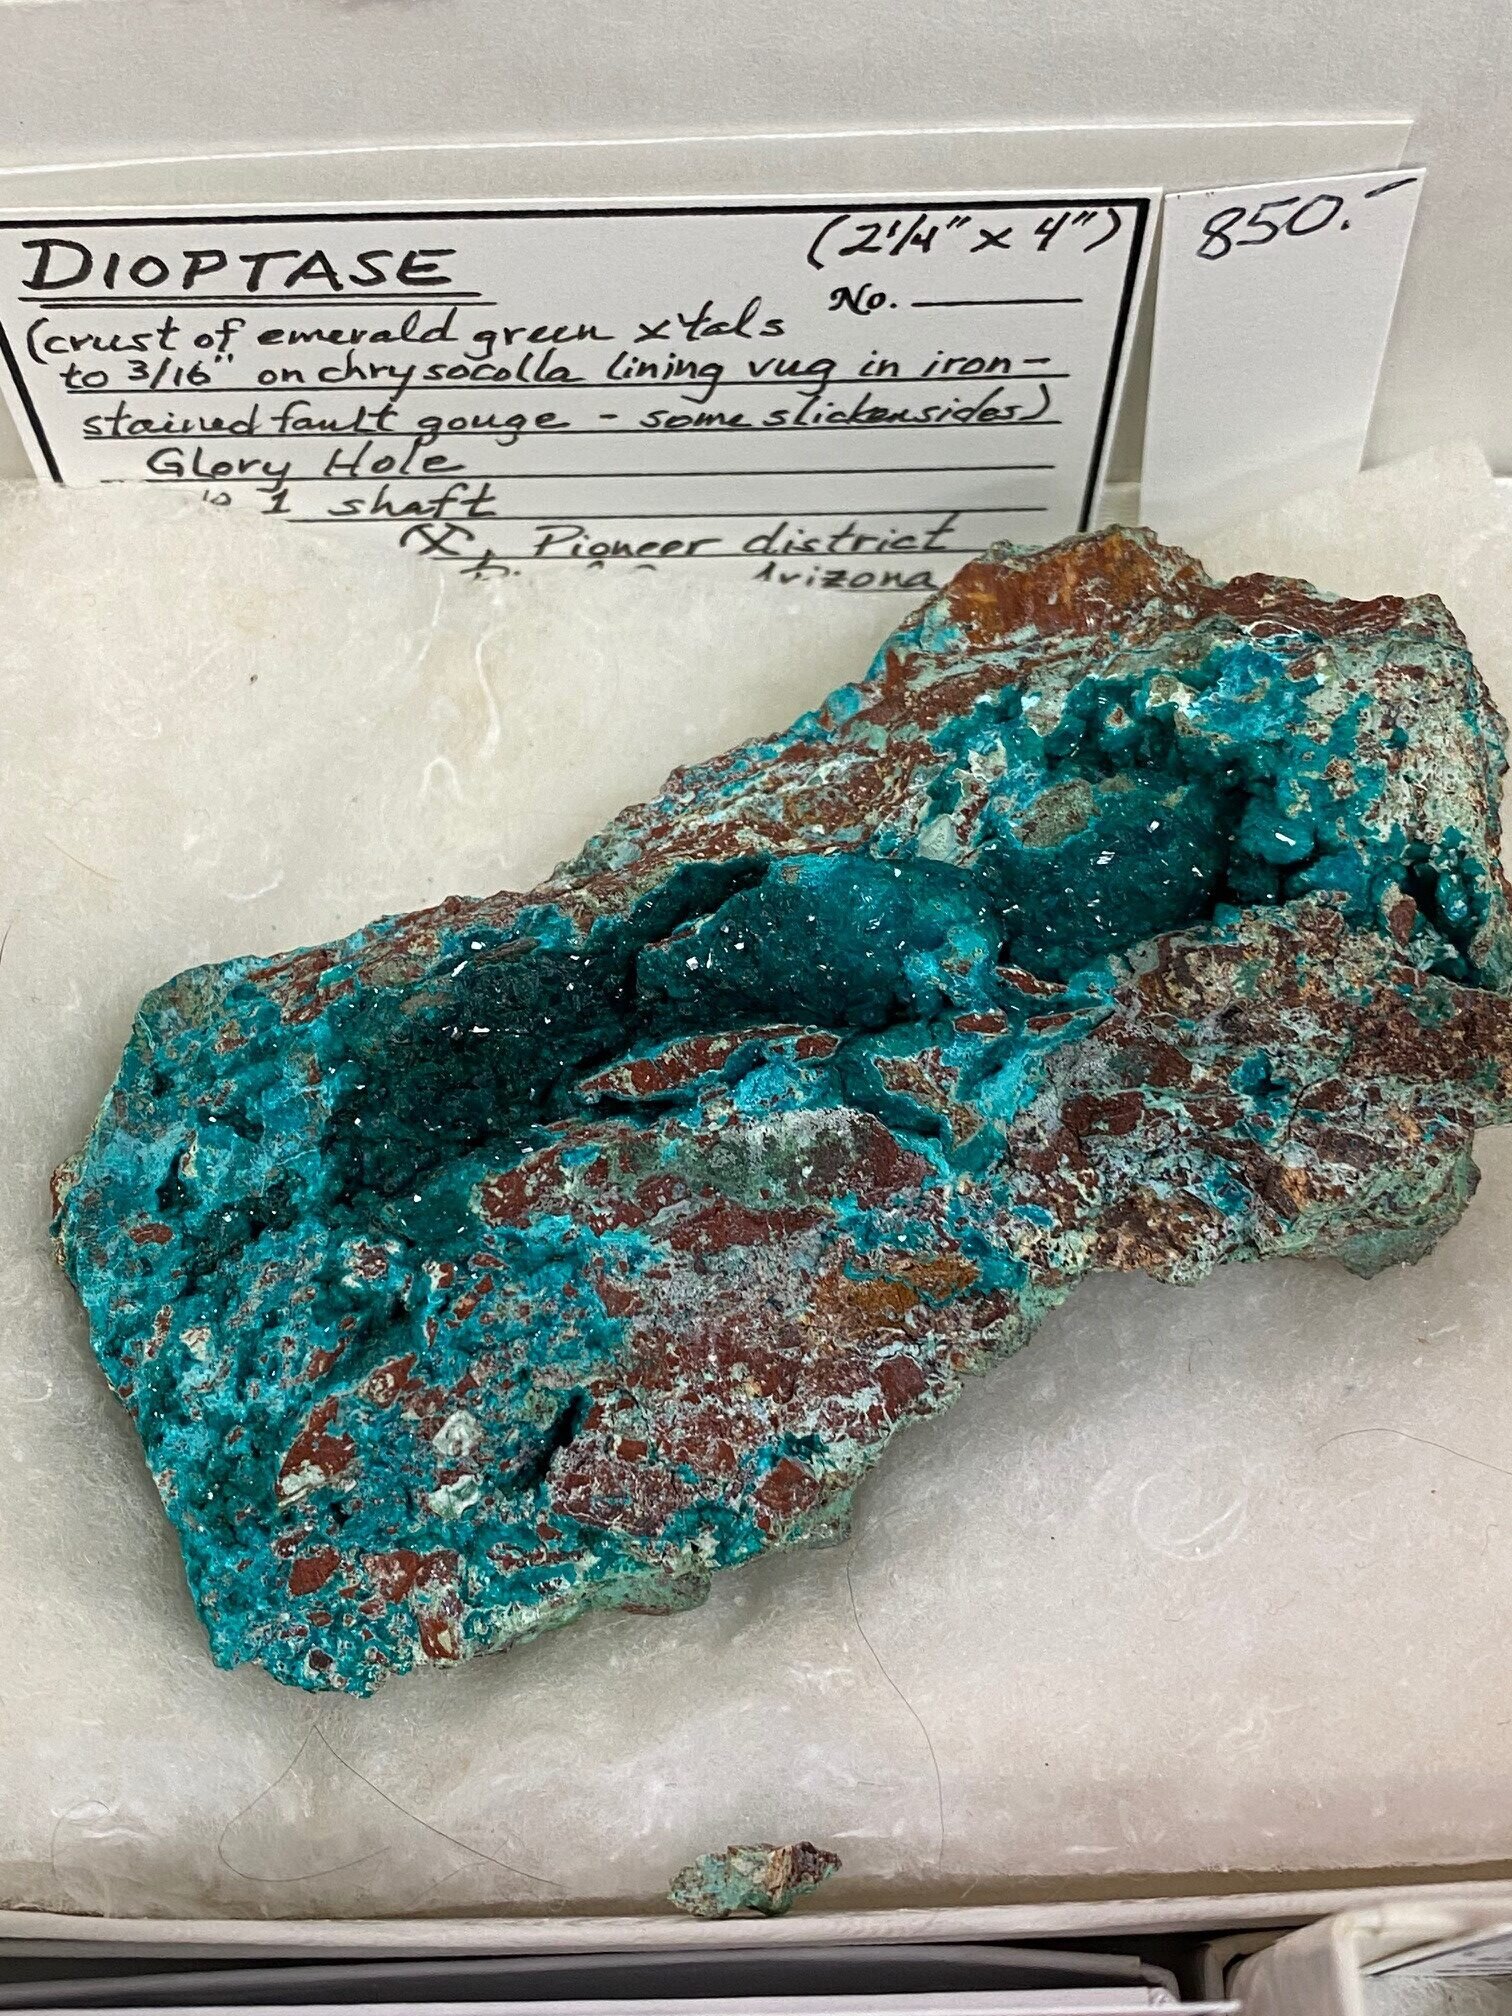 Glory Hole Dioptase – Available